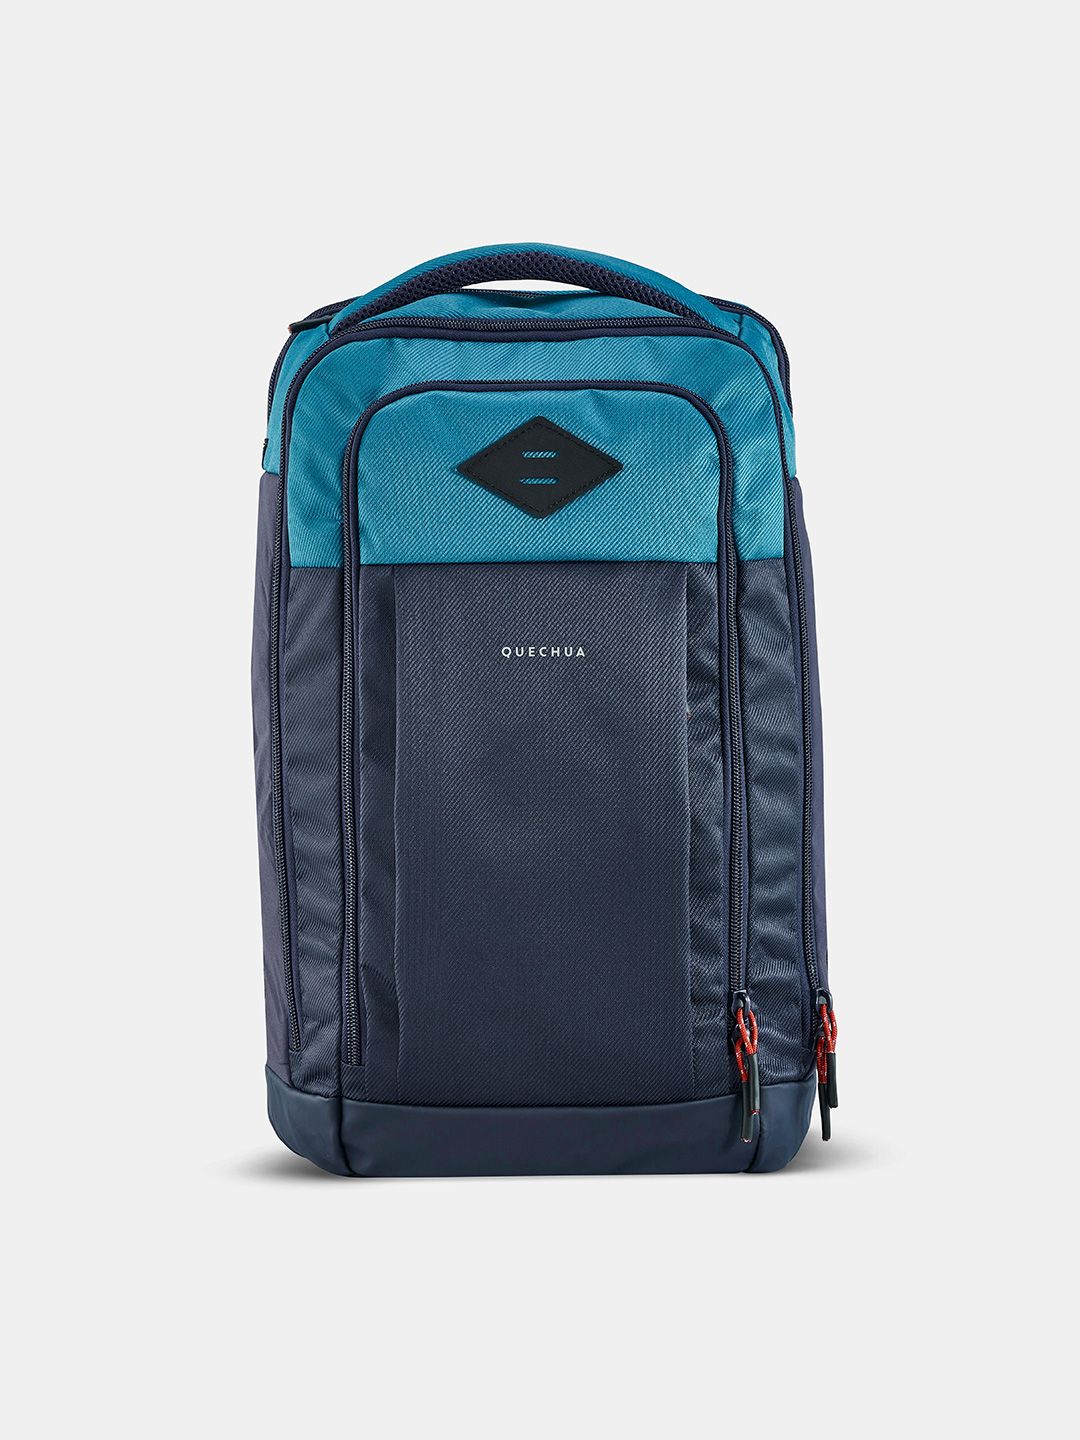 Quechua By Decathlon NH Escape 500 Unisex Blue & Navy Blue Colourblocked Hiking Backpack Price in India